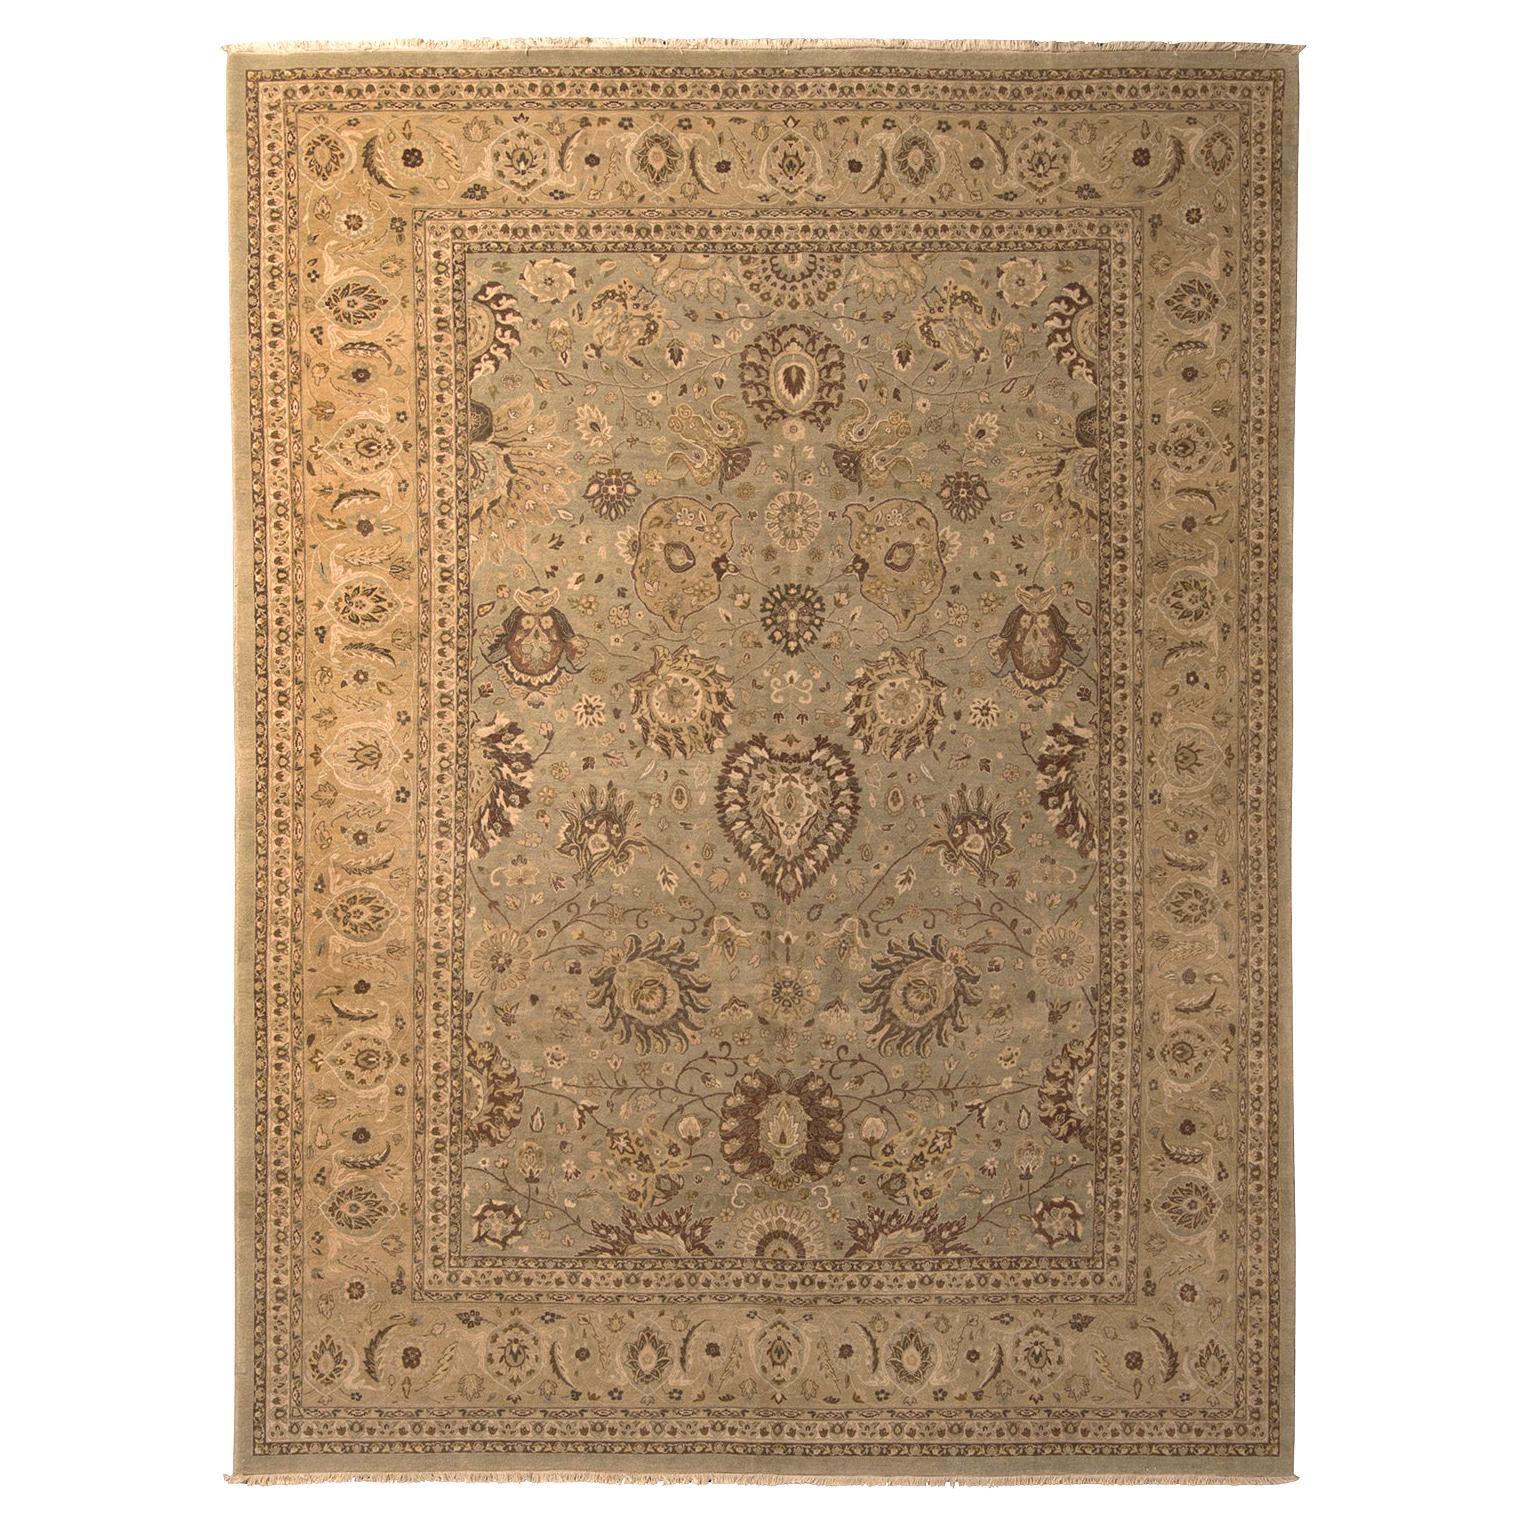 Rug & Kilim's Classic Persian Style Rug, Blue Field, Beige-Brown Floral Pattern